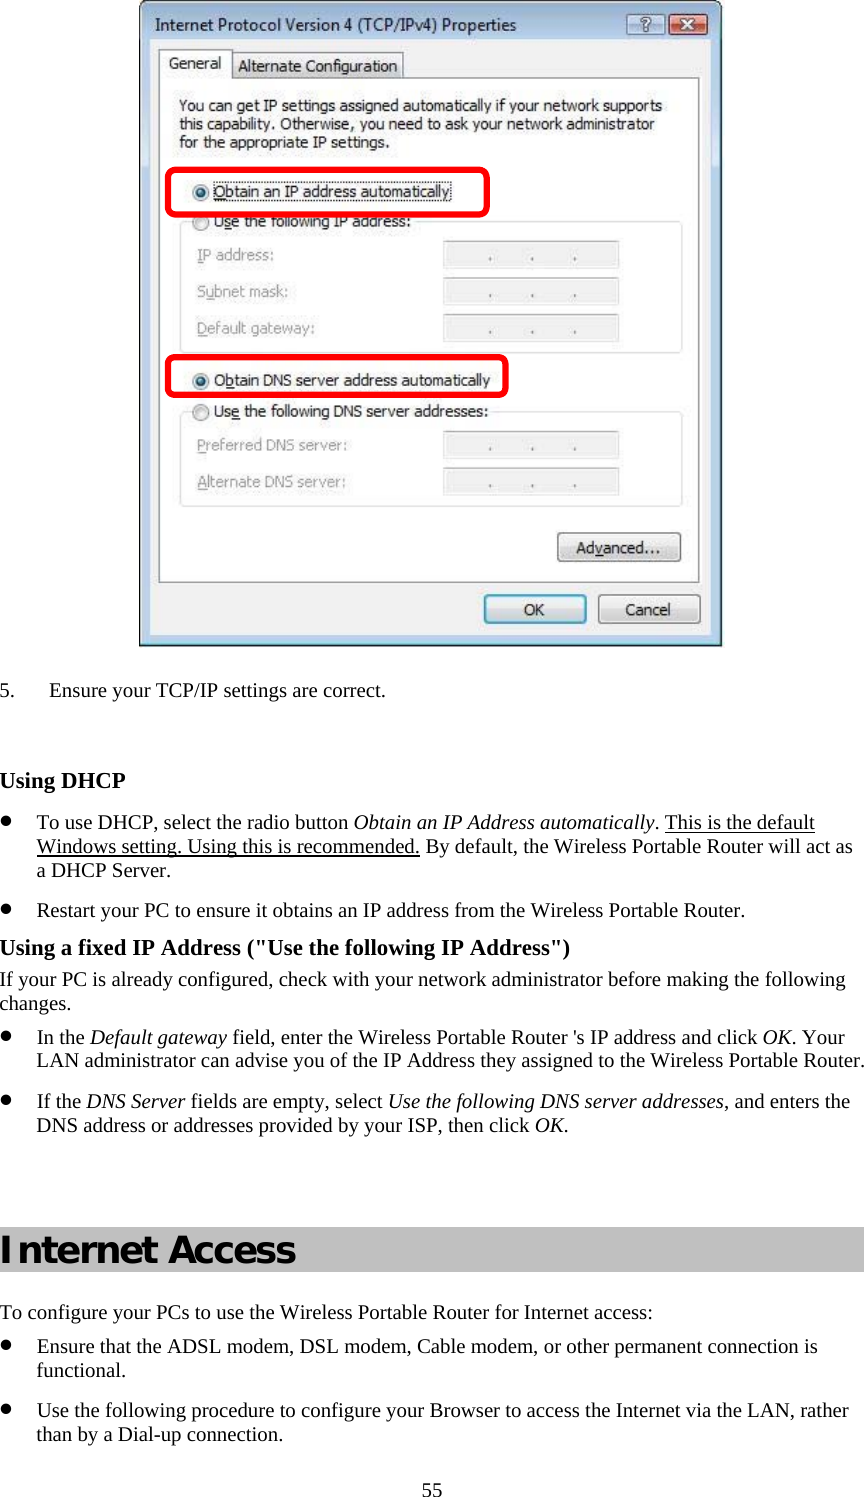   55 5. Ensure your TCP/IP settings are correct.  Using DHCP • To use DHCP, select the radio button Obtain an IP Address automatically. This is the default Windows setting. Using this is recommended. By default, the Wireless Portable Router will act as a DHCP Server. • Restart your PC to ensure it obtains an IP address from the Wireless Portable Router. Using a fixed IP Address (&quot;Use the following IP Address&quot;) If your PC is already configured, check with your network administrator before making the following changes. • In the Default gateway field, enter the Wireless Portable Router &apos;s IP address and click OK. Your LAN administrator can advise you of the IP Address they assigned to the Wireless Portable Router. • If the DNS Server fields are empty, select Use the following DNS server addresses, and enters the DNS address or addresses provided by your ISP, then click OK.   Internet Access To configure your PCs to use the Wireless Portable Router for Internet access: • Ensure that the ADSL modem, DSL modem, Cable modem, or other permanent connection is functional. • Use the following procedure to configure your Browser to access the Internet via the LAN, rather than by a Dial-up connection.  